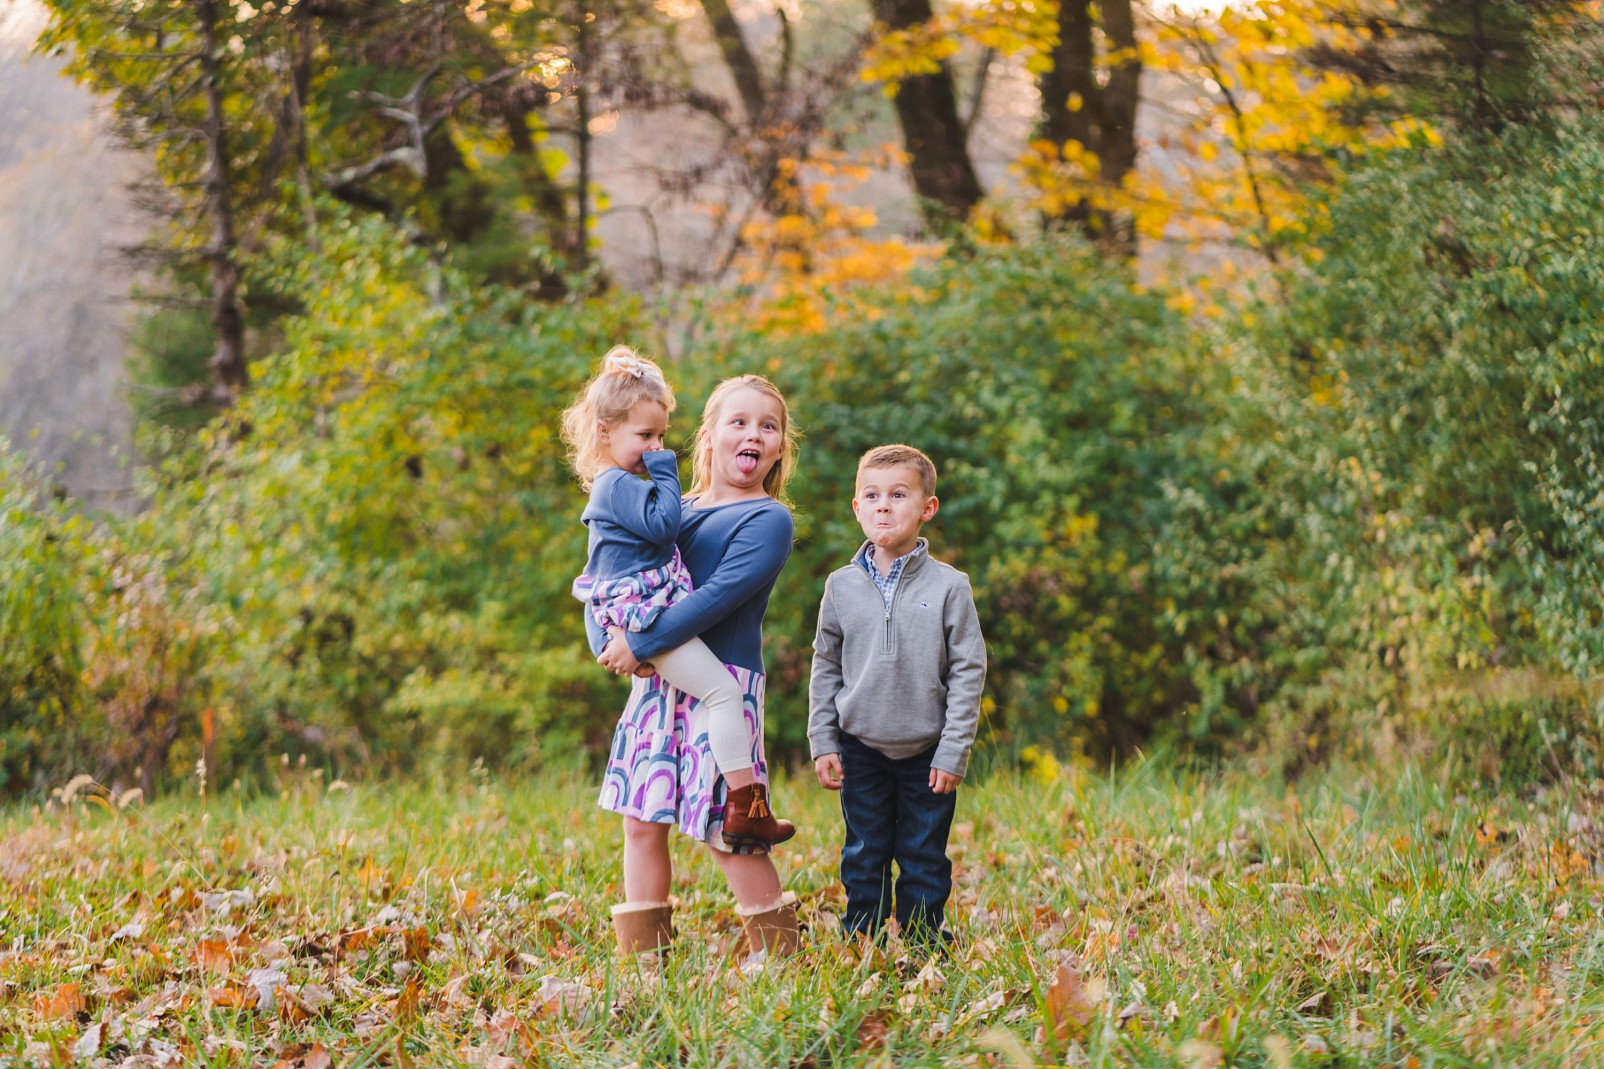 kids making silly faces | Melissa Sheridan Photography